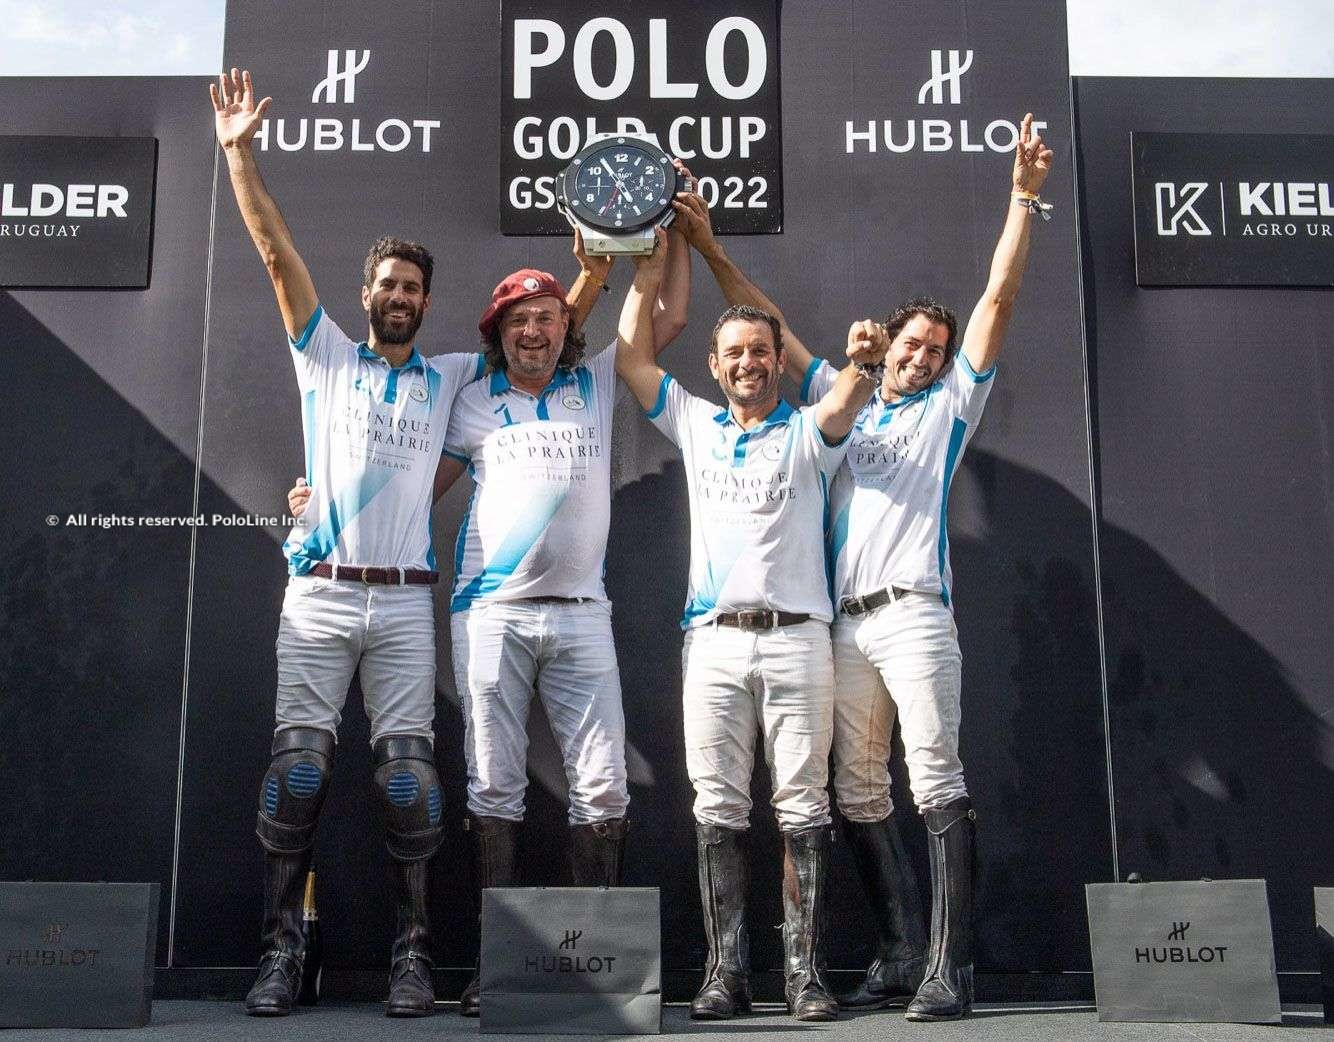 Hublot Polo Gold Cup Gstaad, Finals